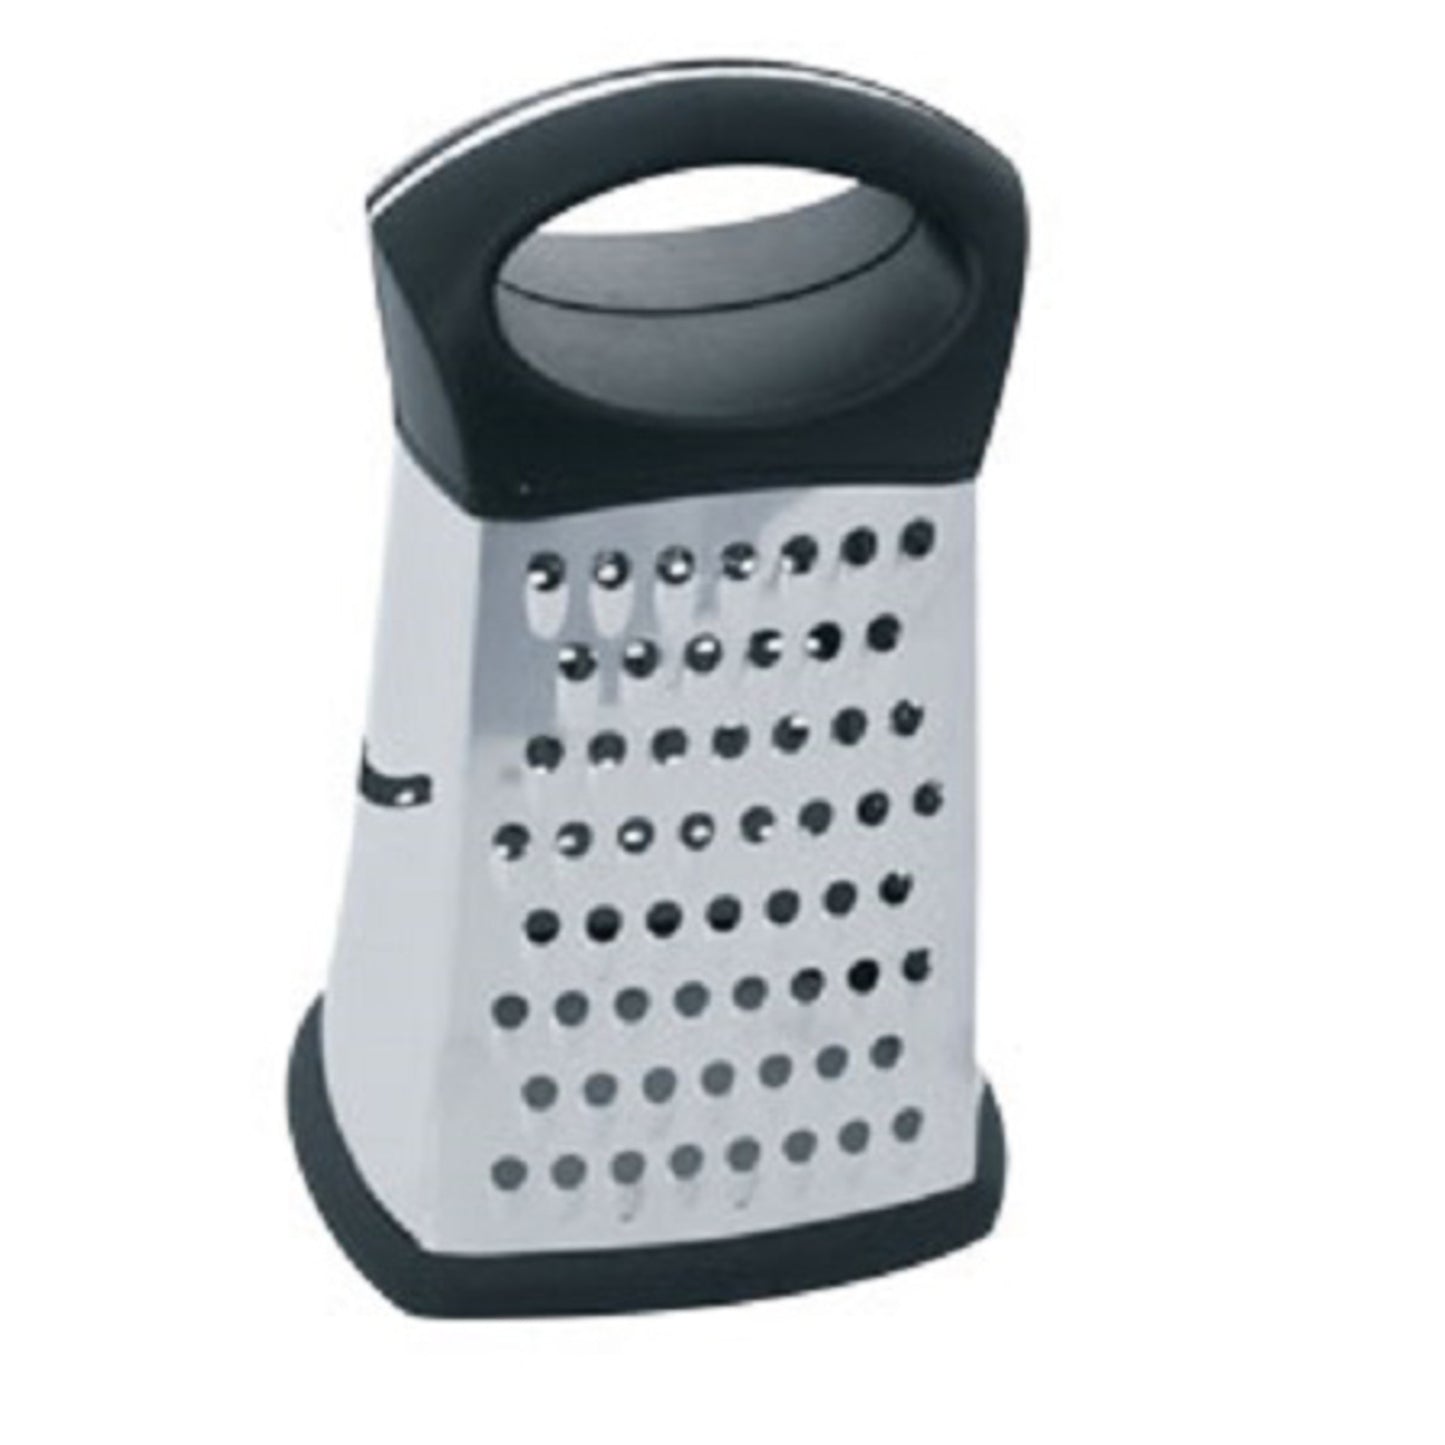 Home Basics Stainless Steel 4 Sided Cheese Grater - Black